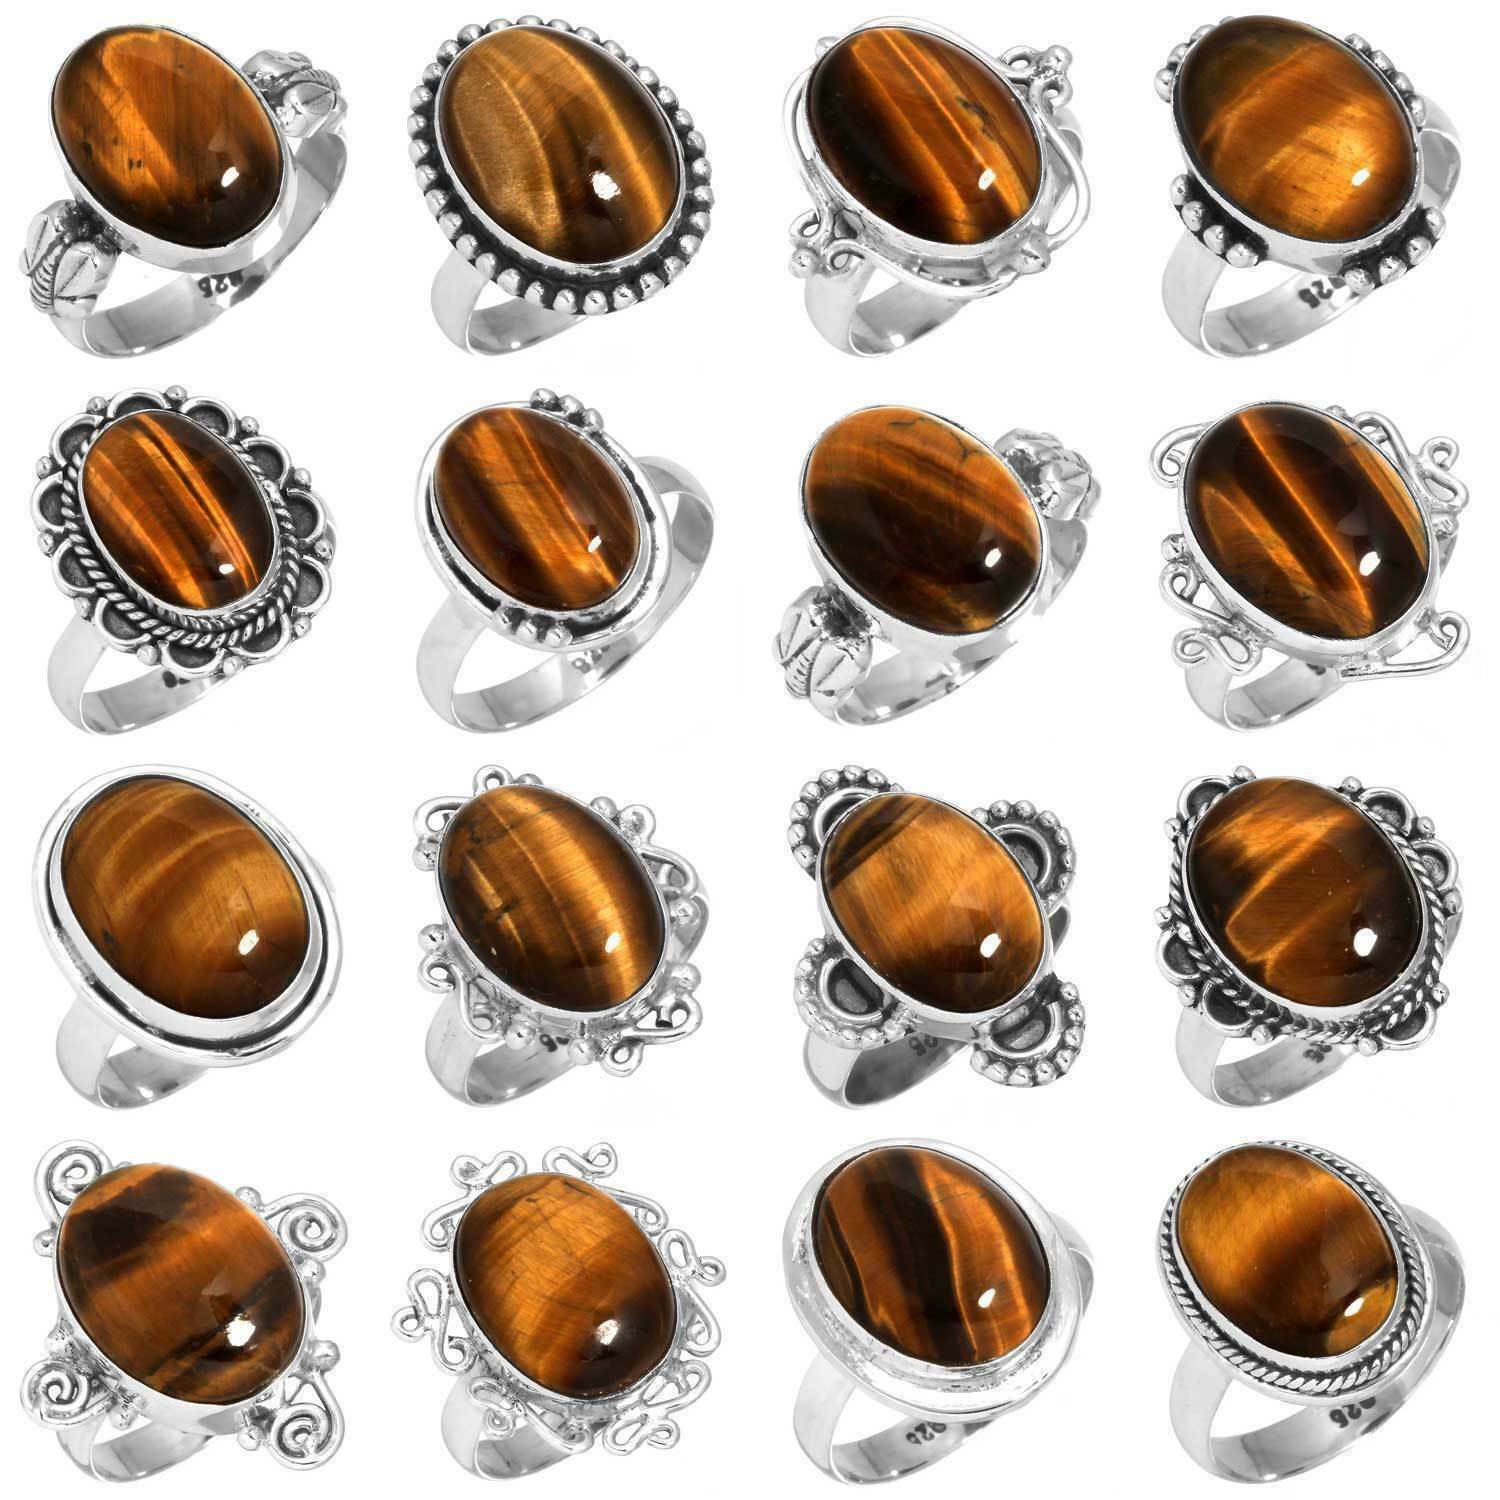 Tigers Eye Gemstone 20pcs Rings Lot 925 Silver Plated S-whru-4